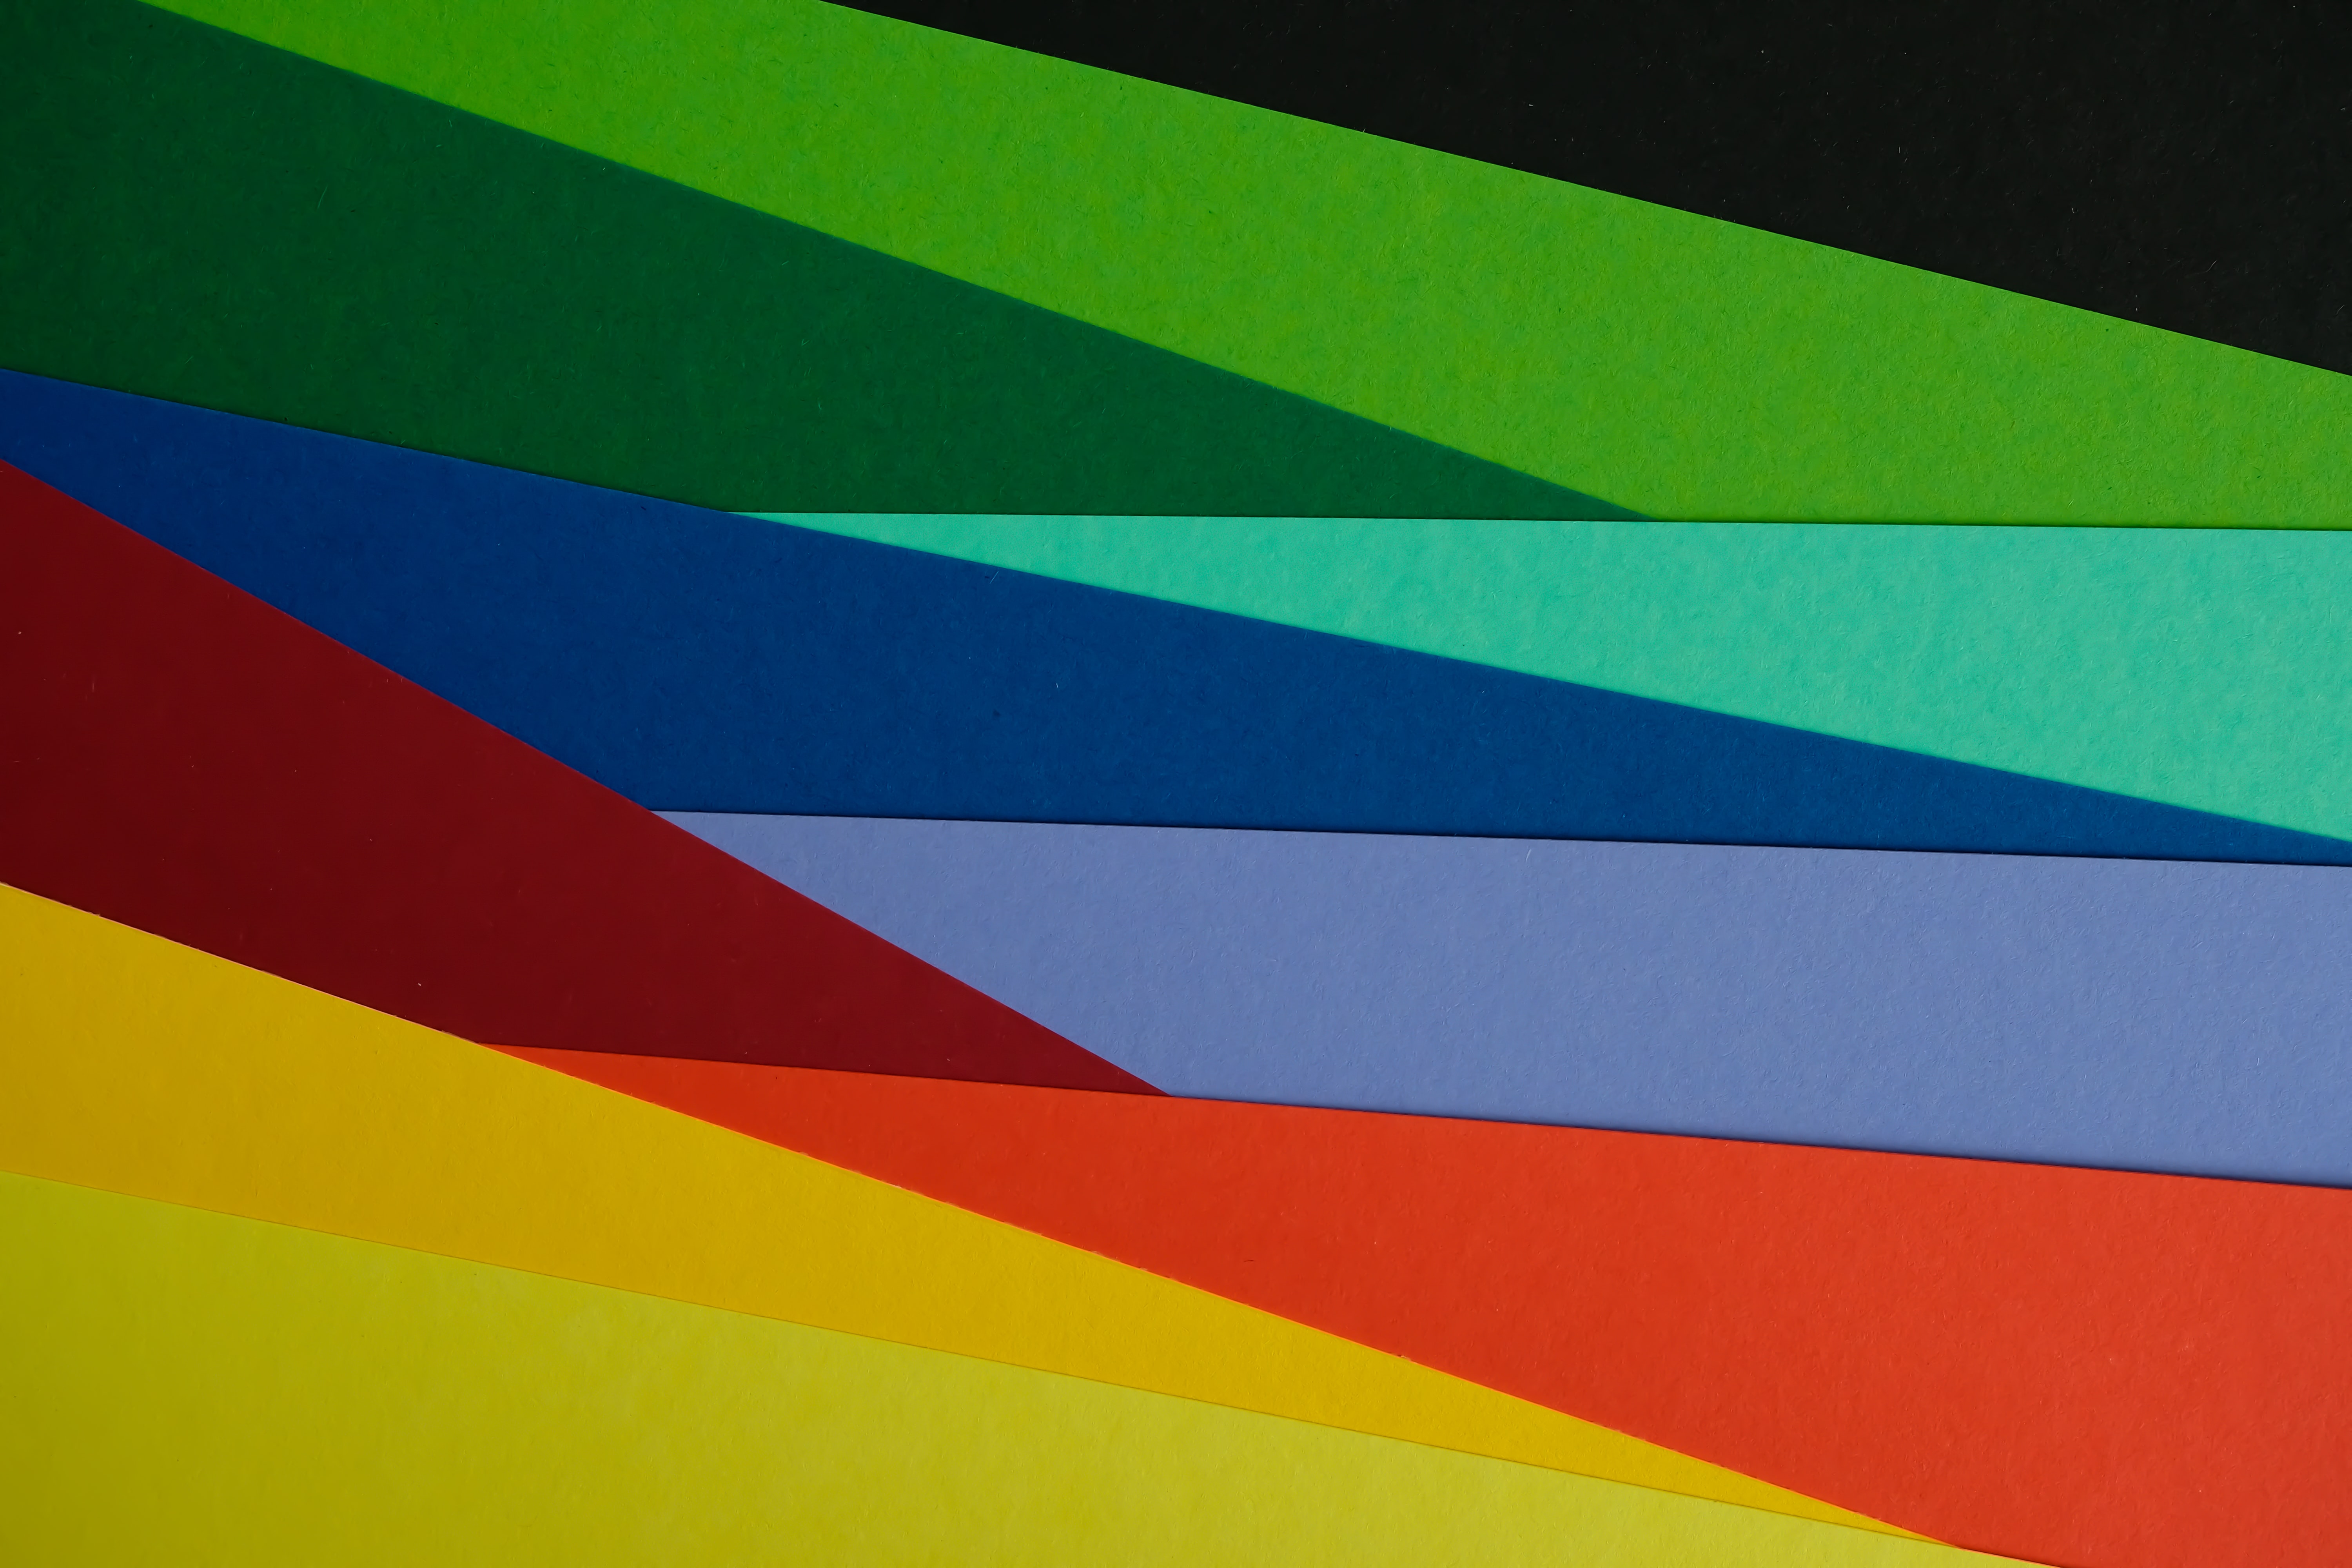 color, colors, motley, rainbow, abstract, multicolored, paper